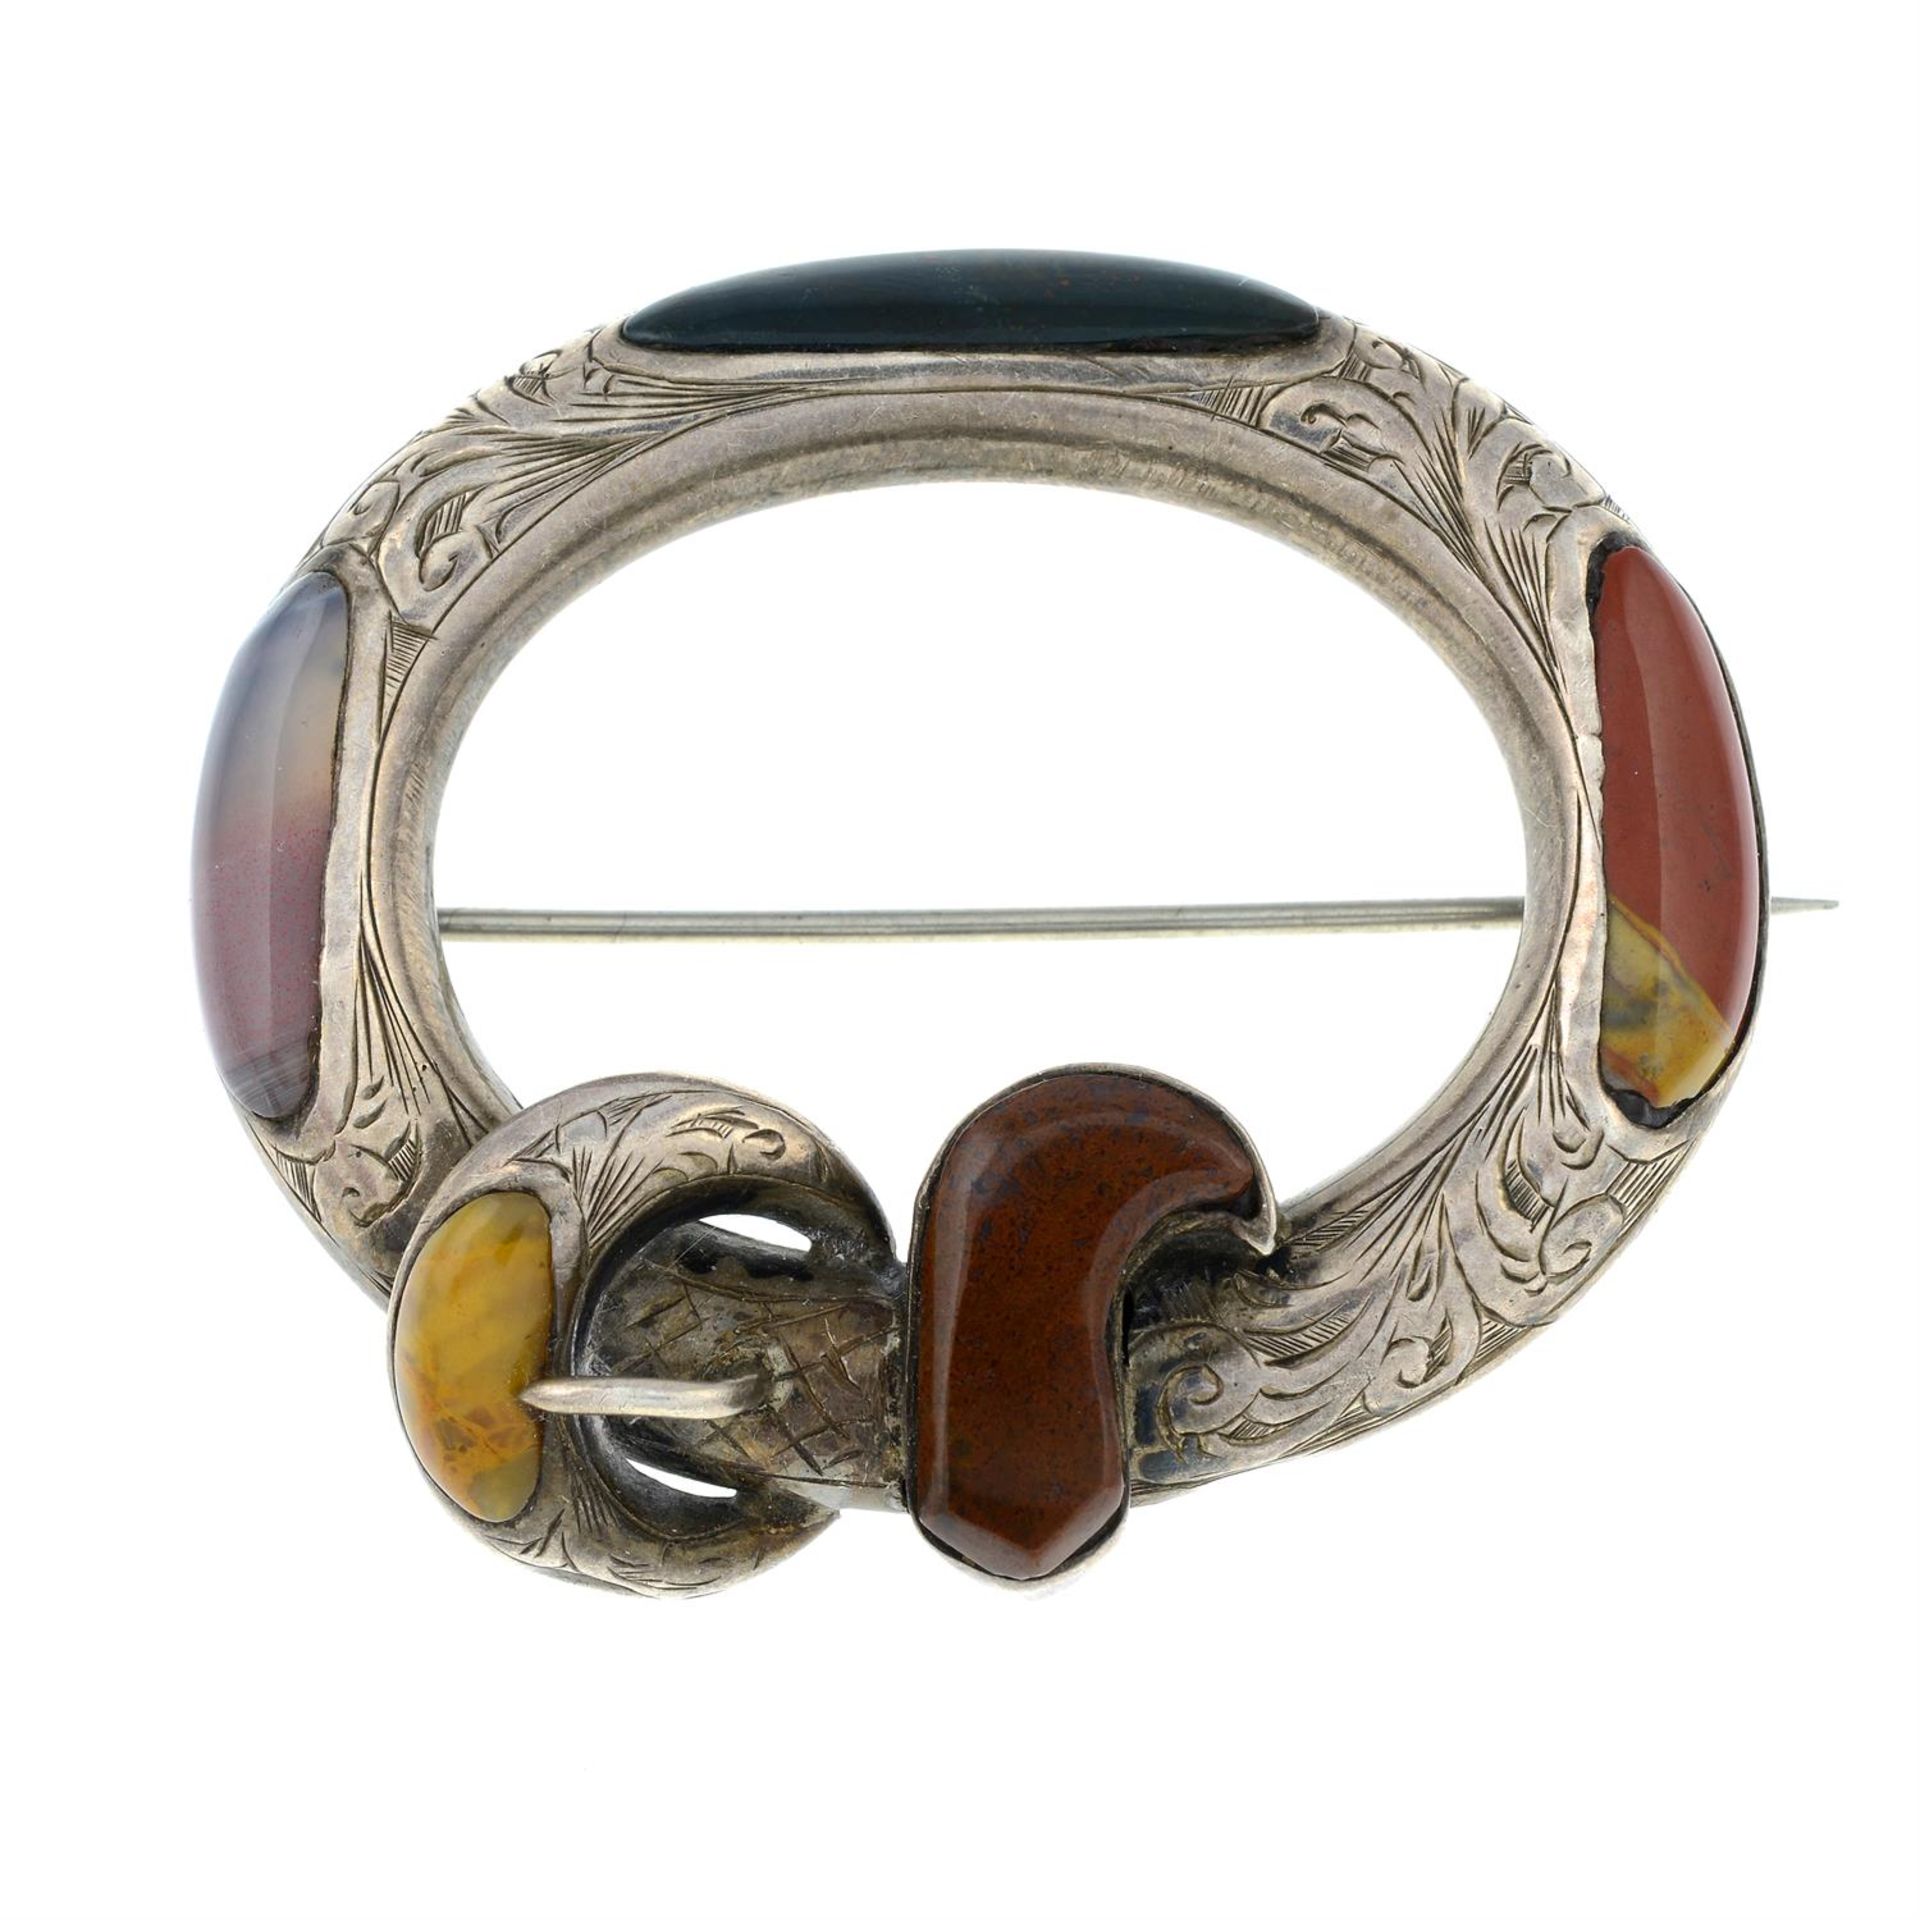 A 19th century Scottish 'Pebble' buckle brooch with engraved foliate decoration.